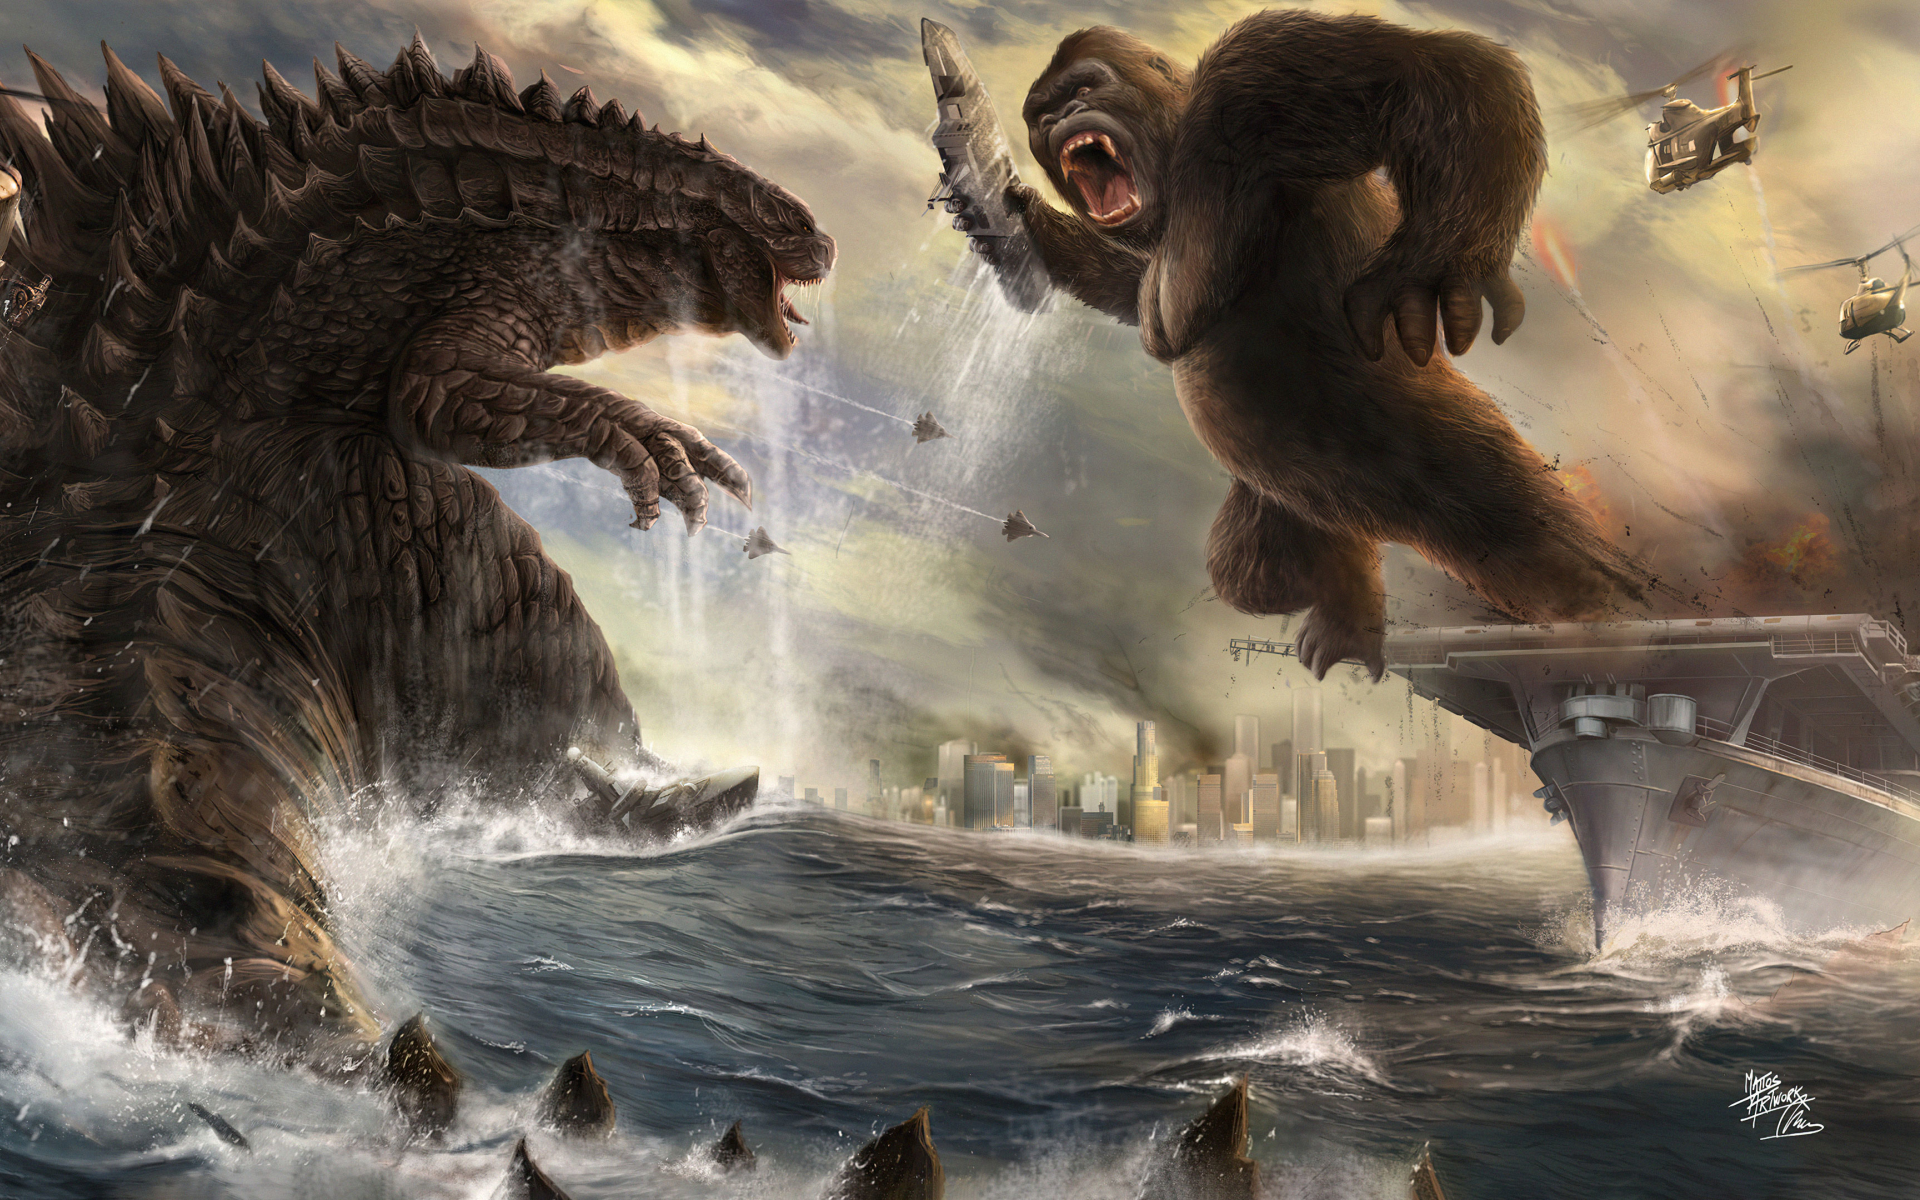 1920x1200 Godzilla Vs Kong New 2021 1200p Wallpaper Hd Movies 4k Wallpapers Images Photos And Background Wallpapers Den